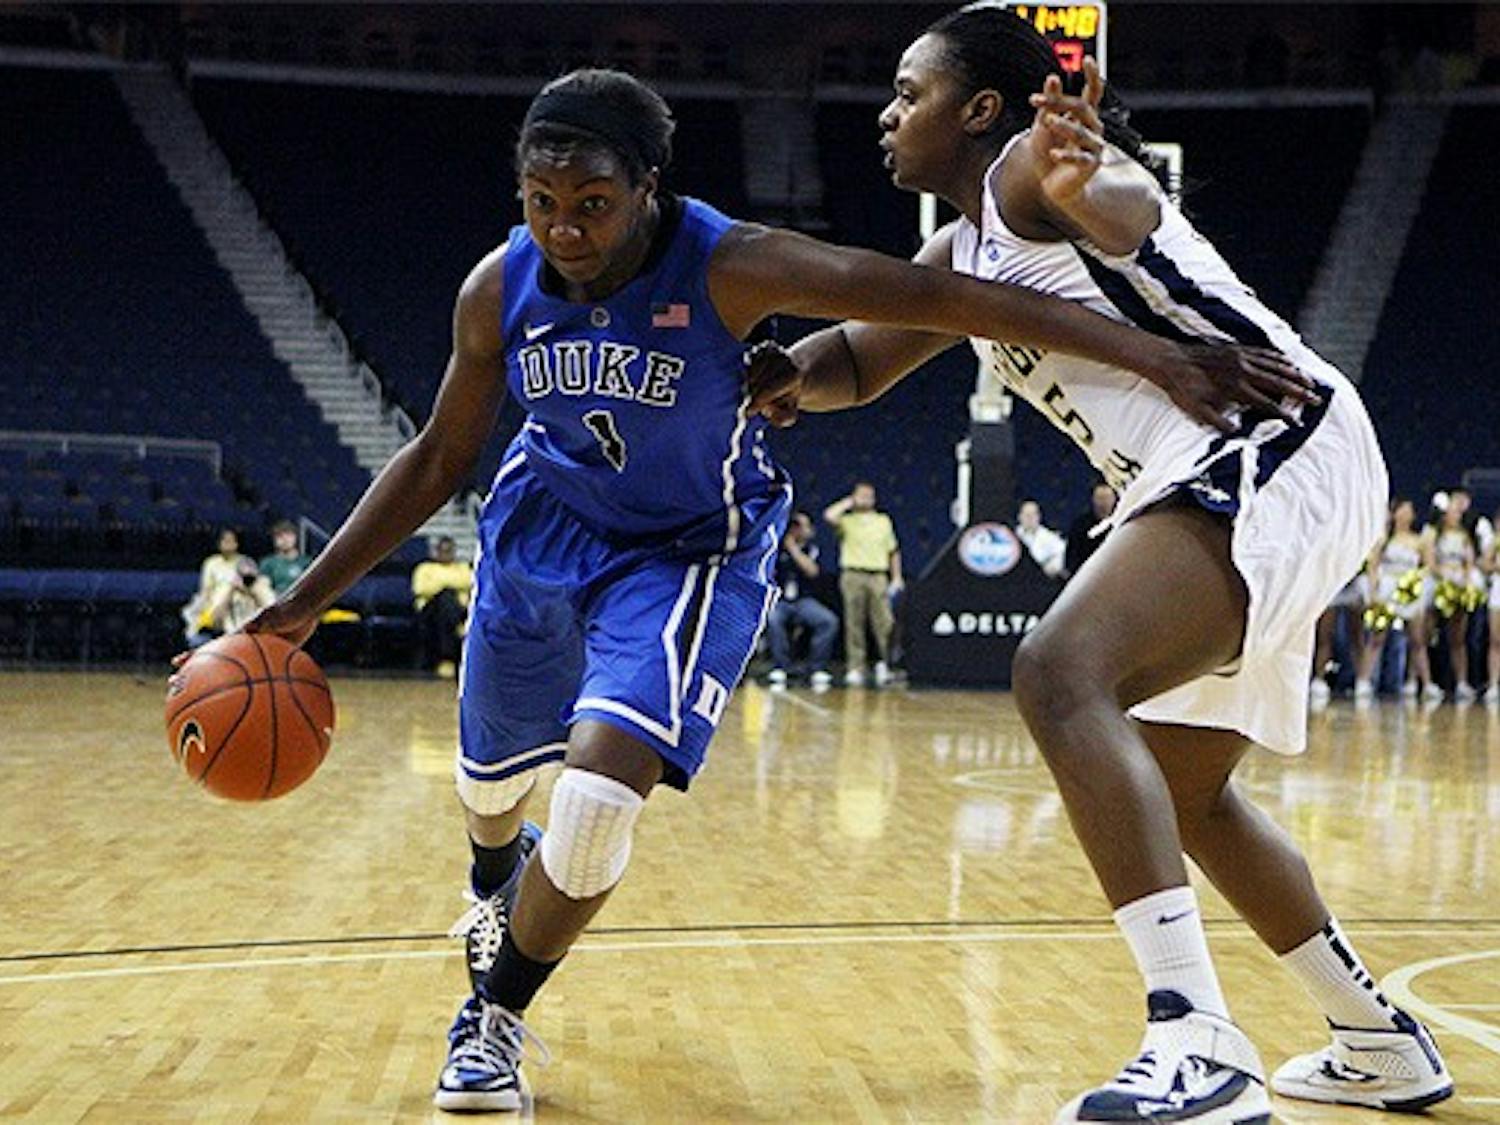 Elizabeth Williams had a double-double against her toughest post competition of the ACC season.